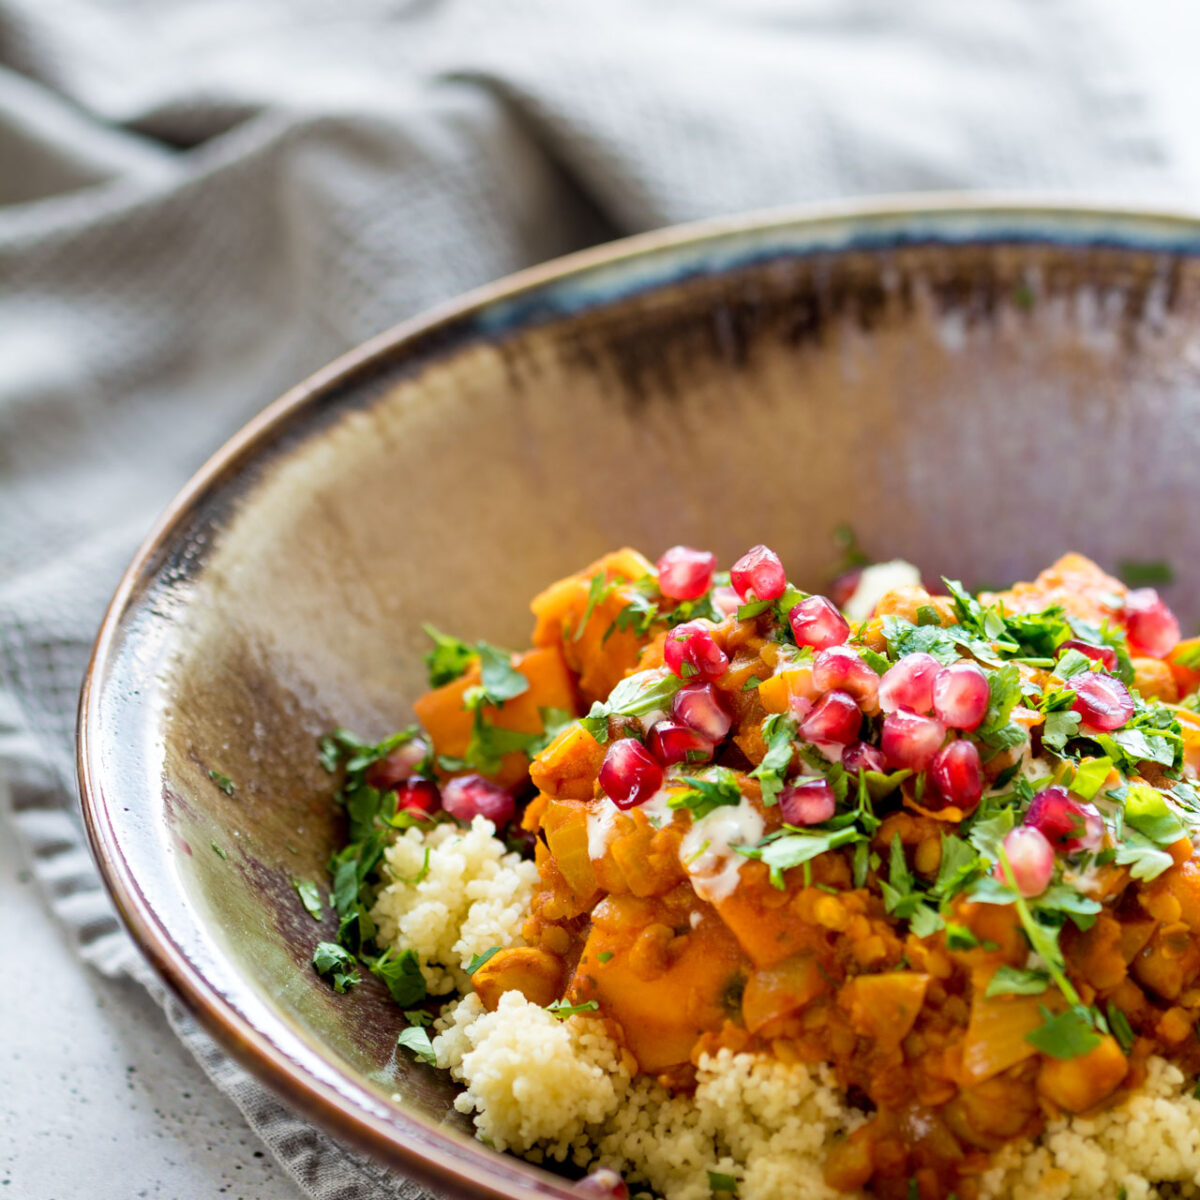 A simple one pot Sweet Potato and Chickpea Moroccan Style Stew is perfect for freezing so you always have a delicious, hearty meal on hand on those days when you just don't have time!